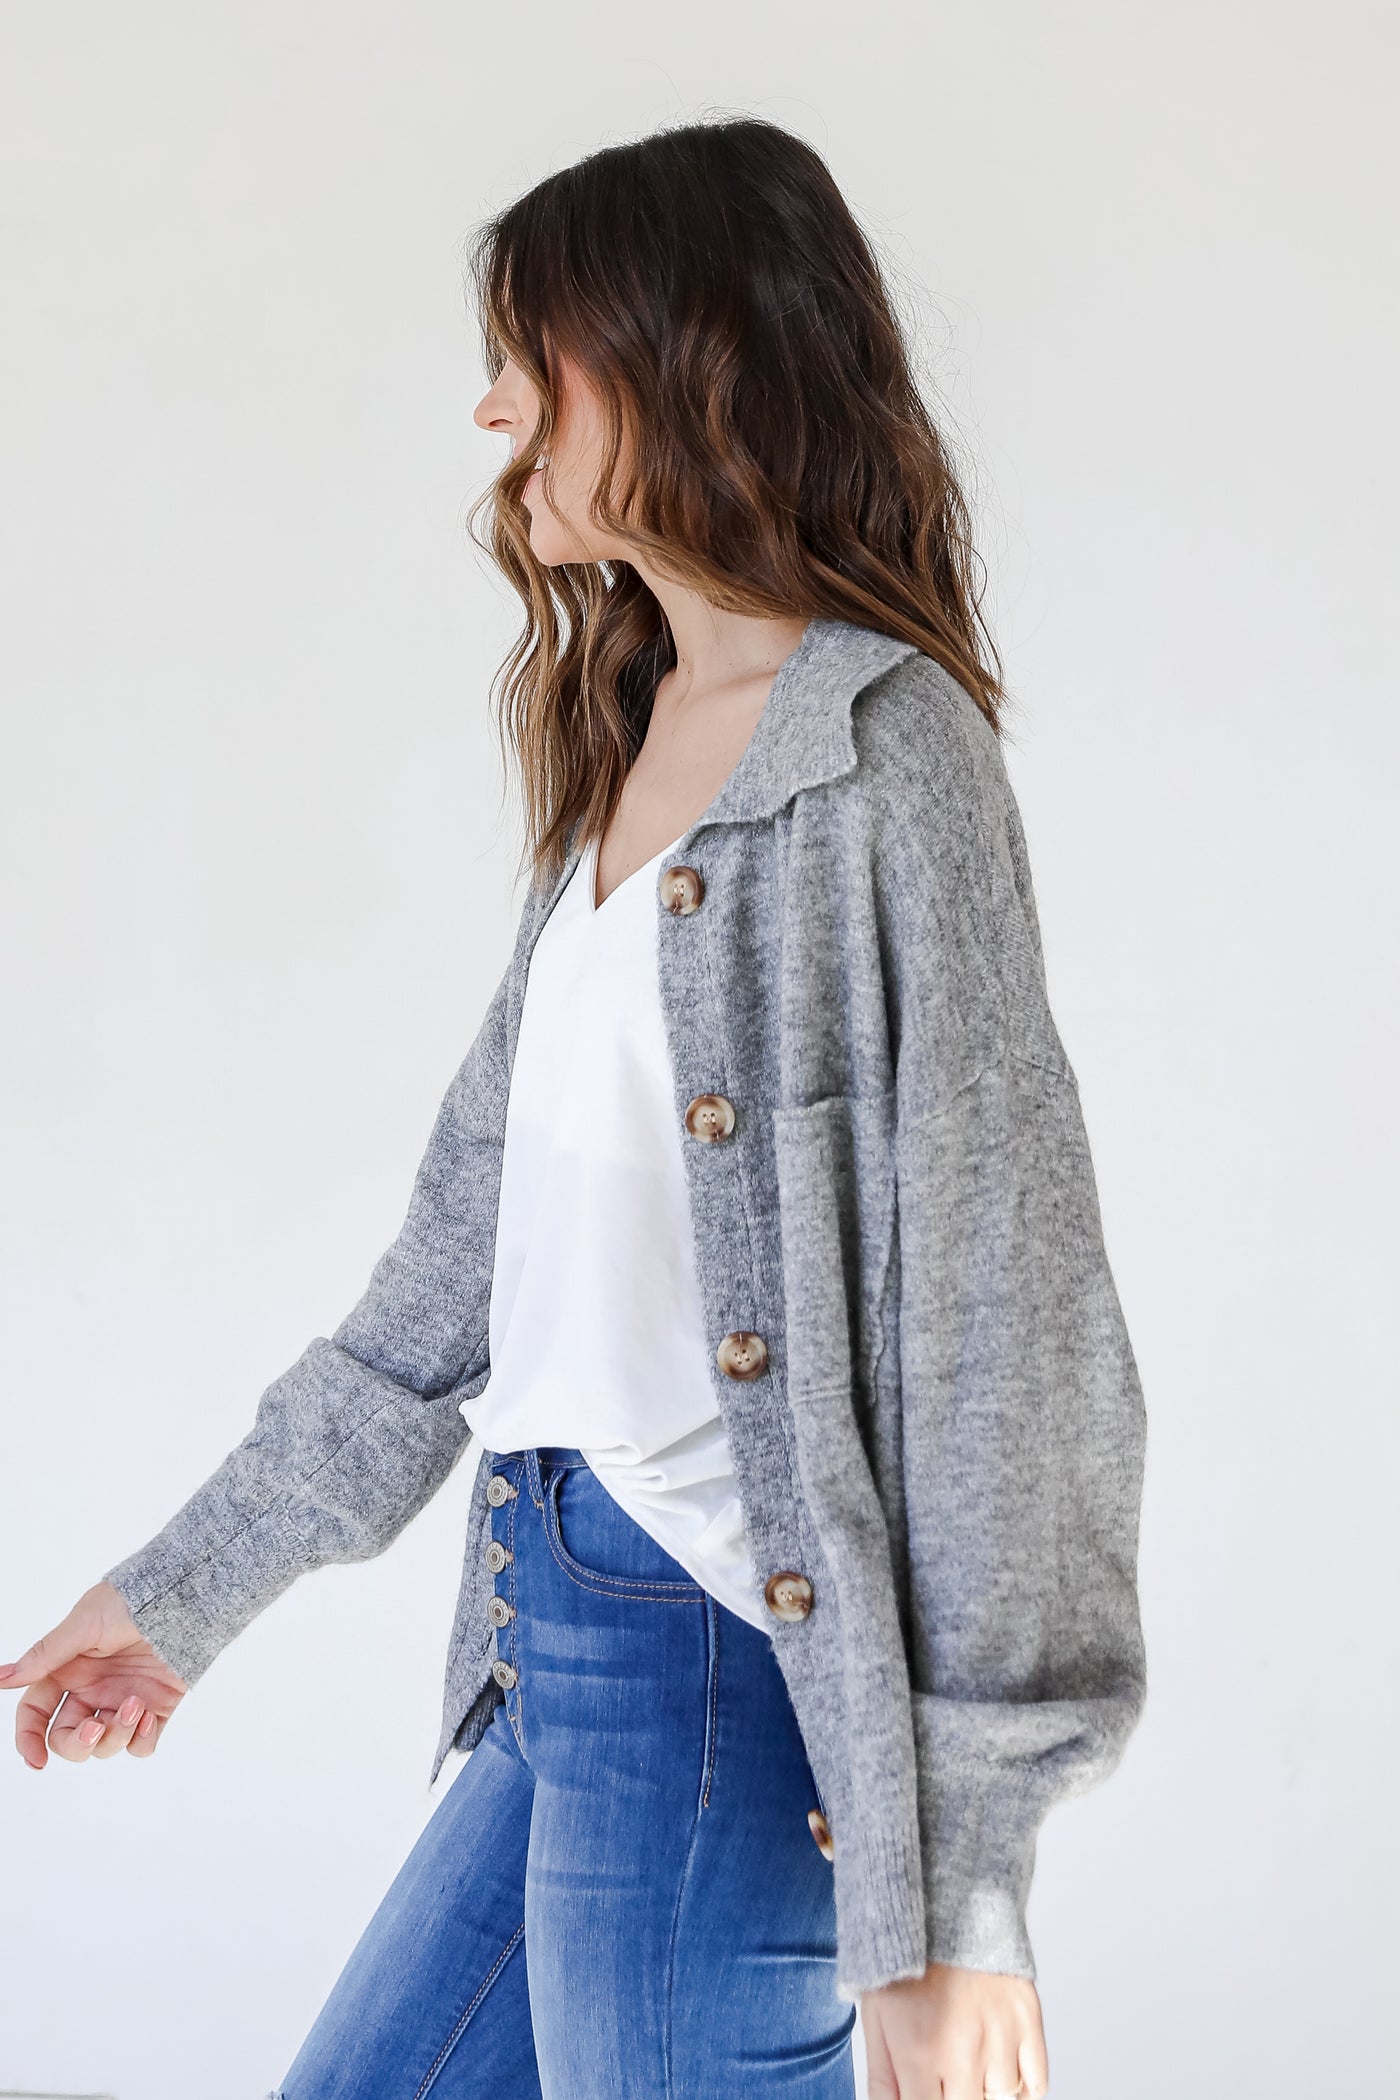 Sweater Cardigan in heather grey side view